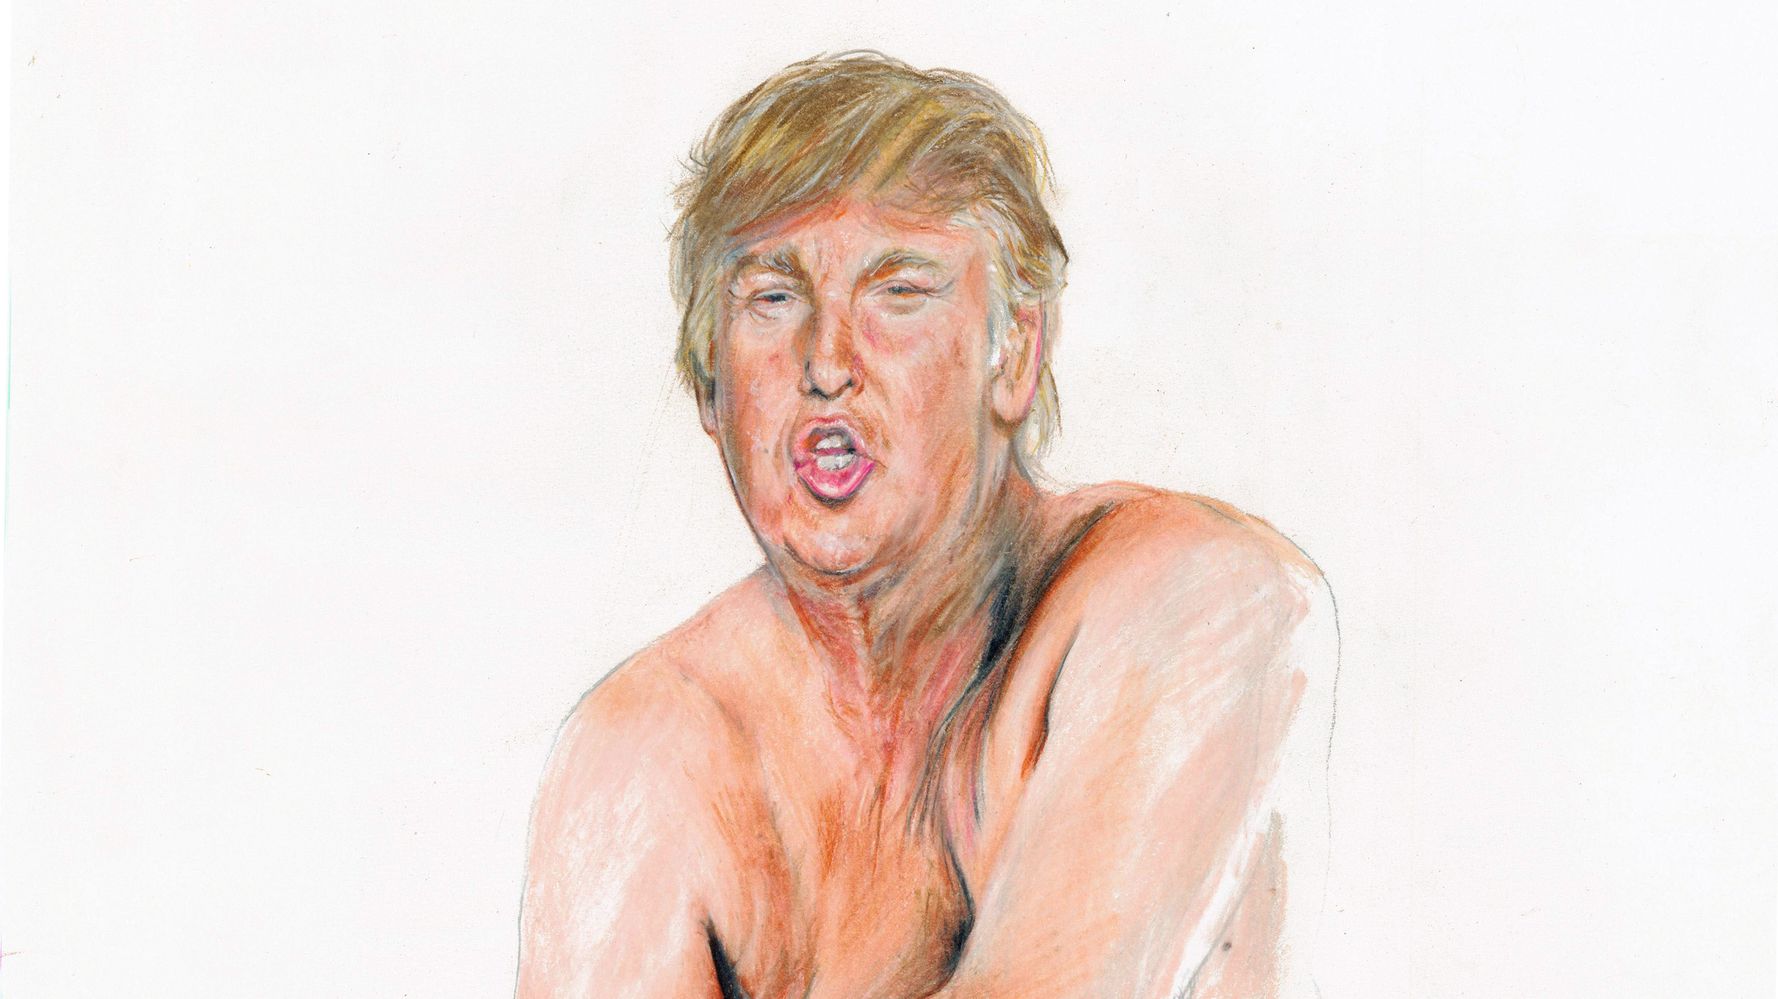 Artist Imagines What Donald Trump Looks Like Naked And It Ain't Pretty...